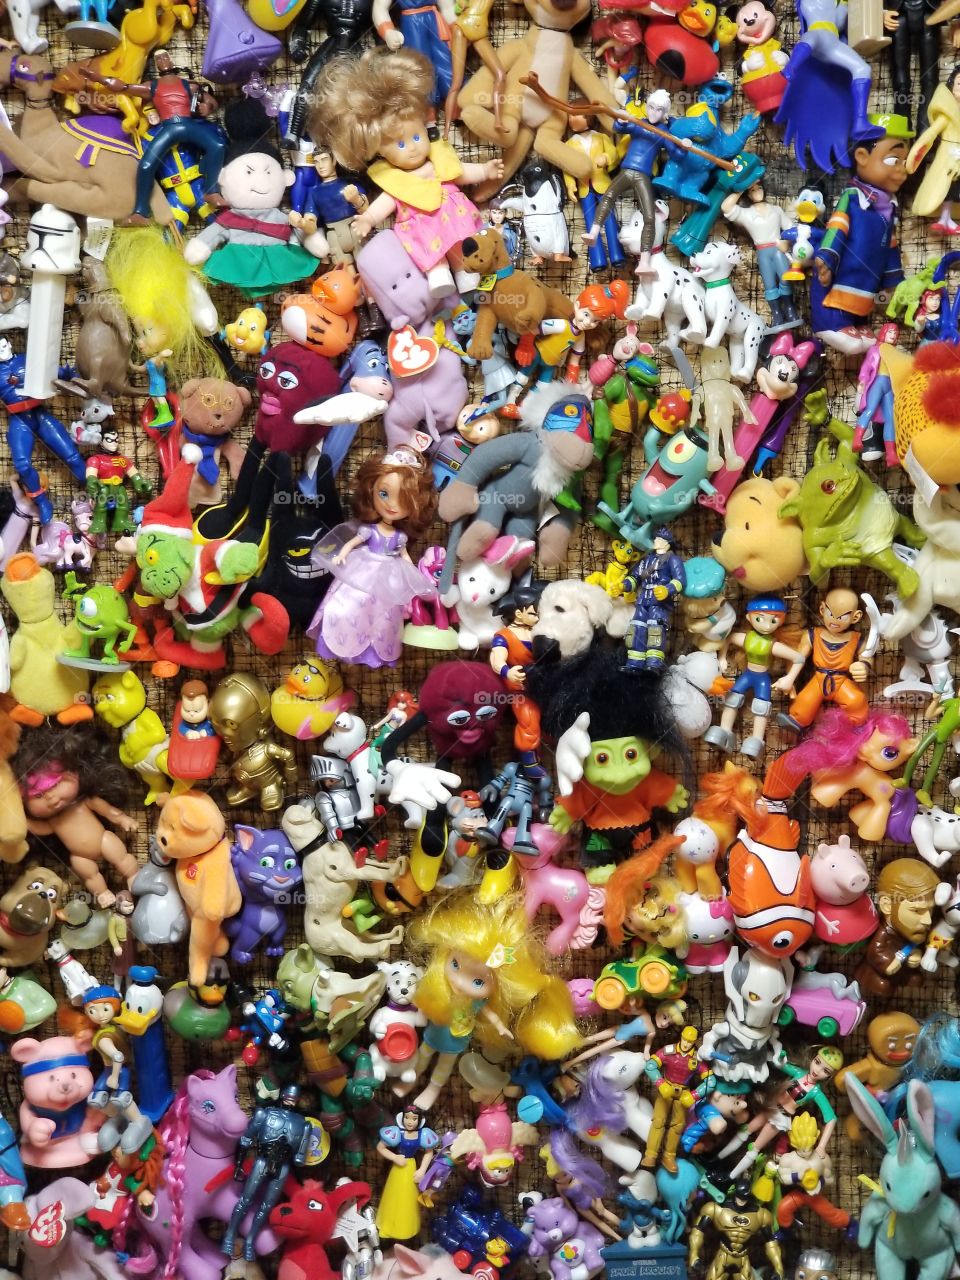 Toys, action figures, and stuffed animals